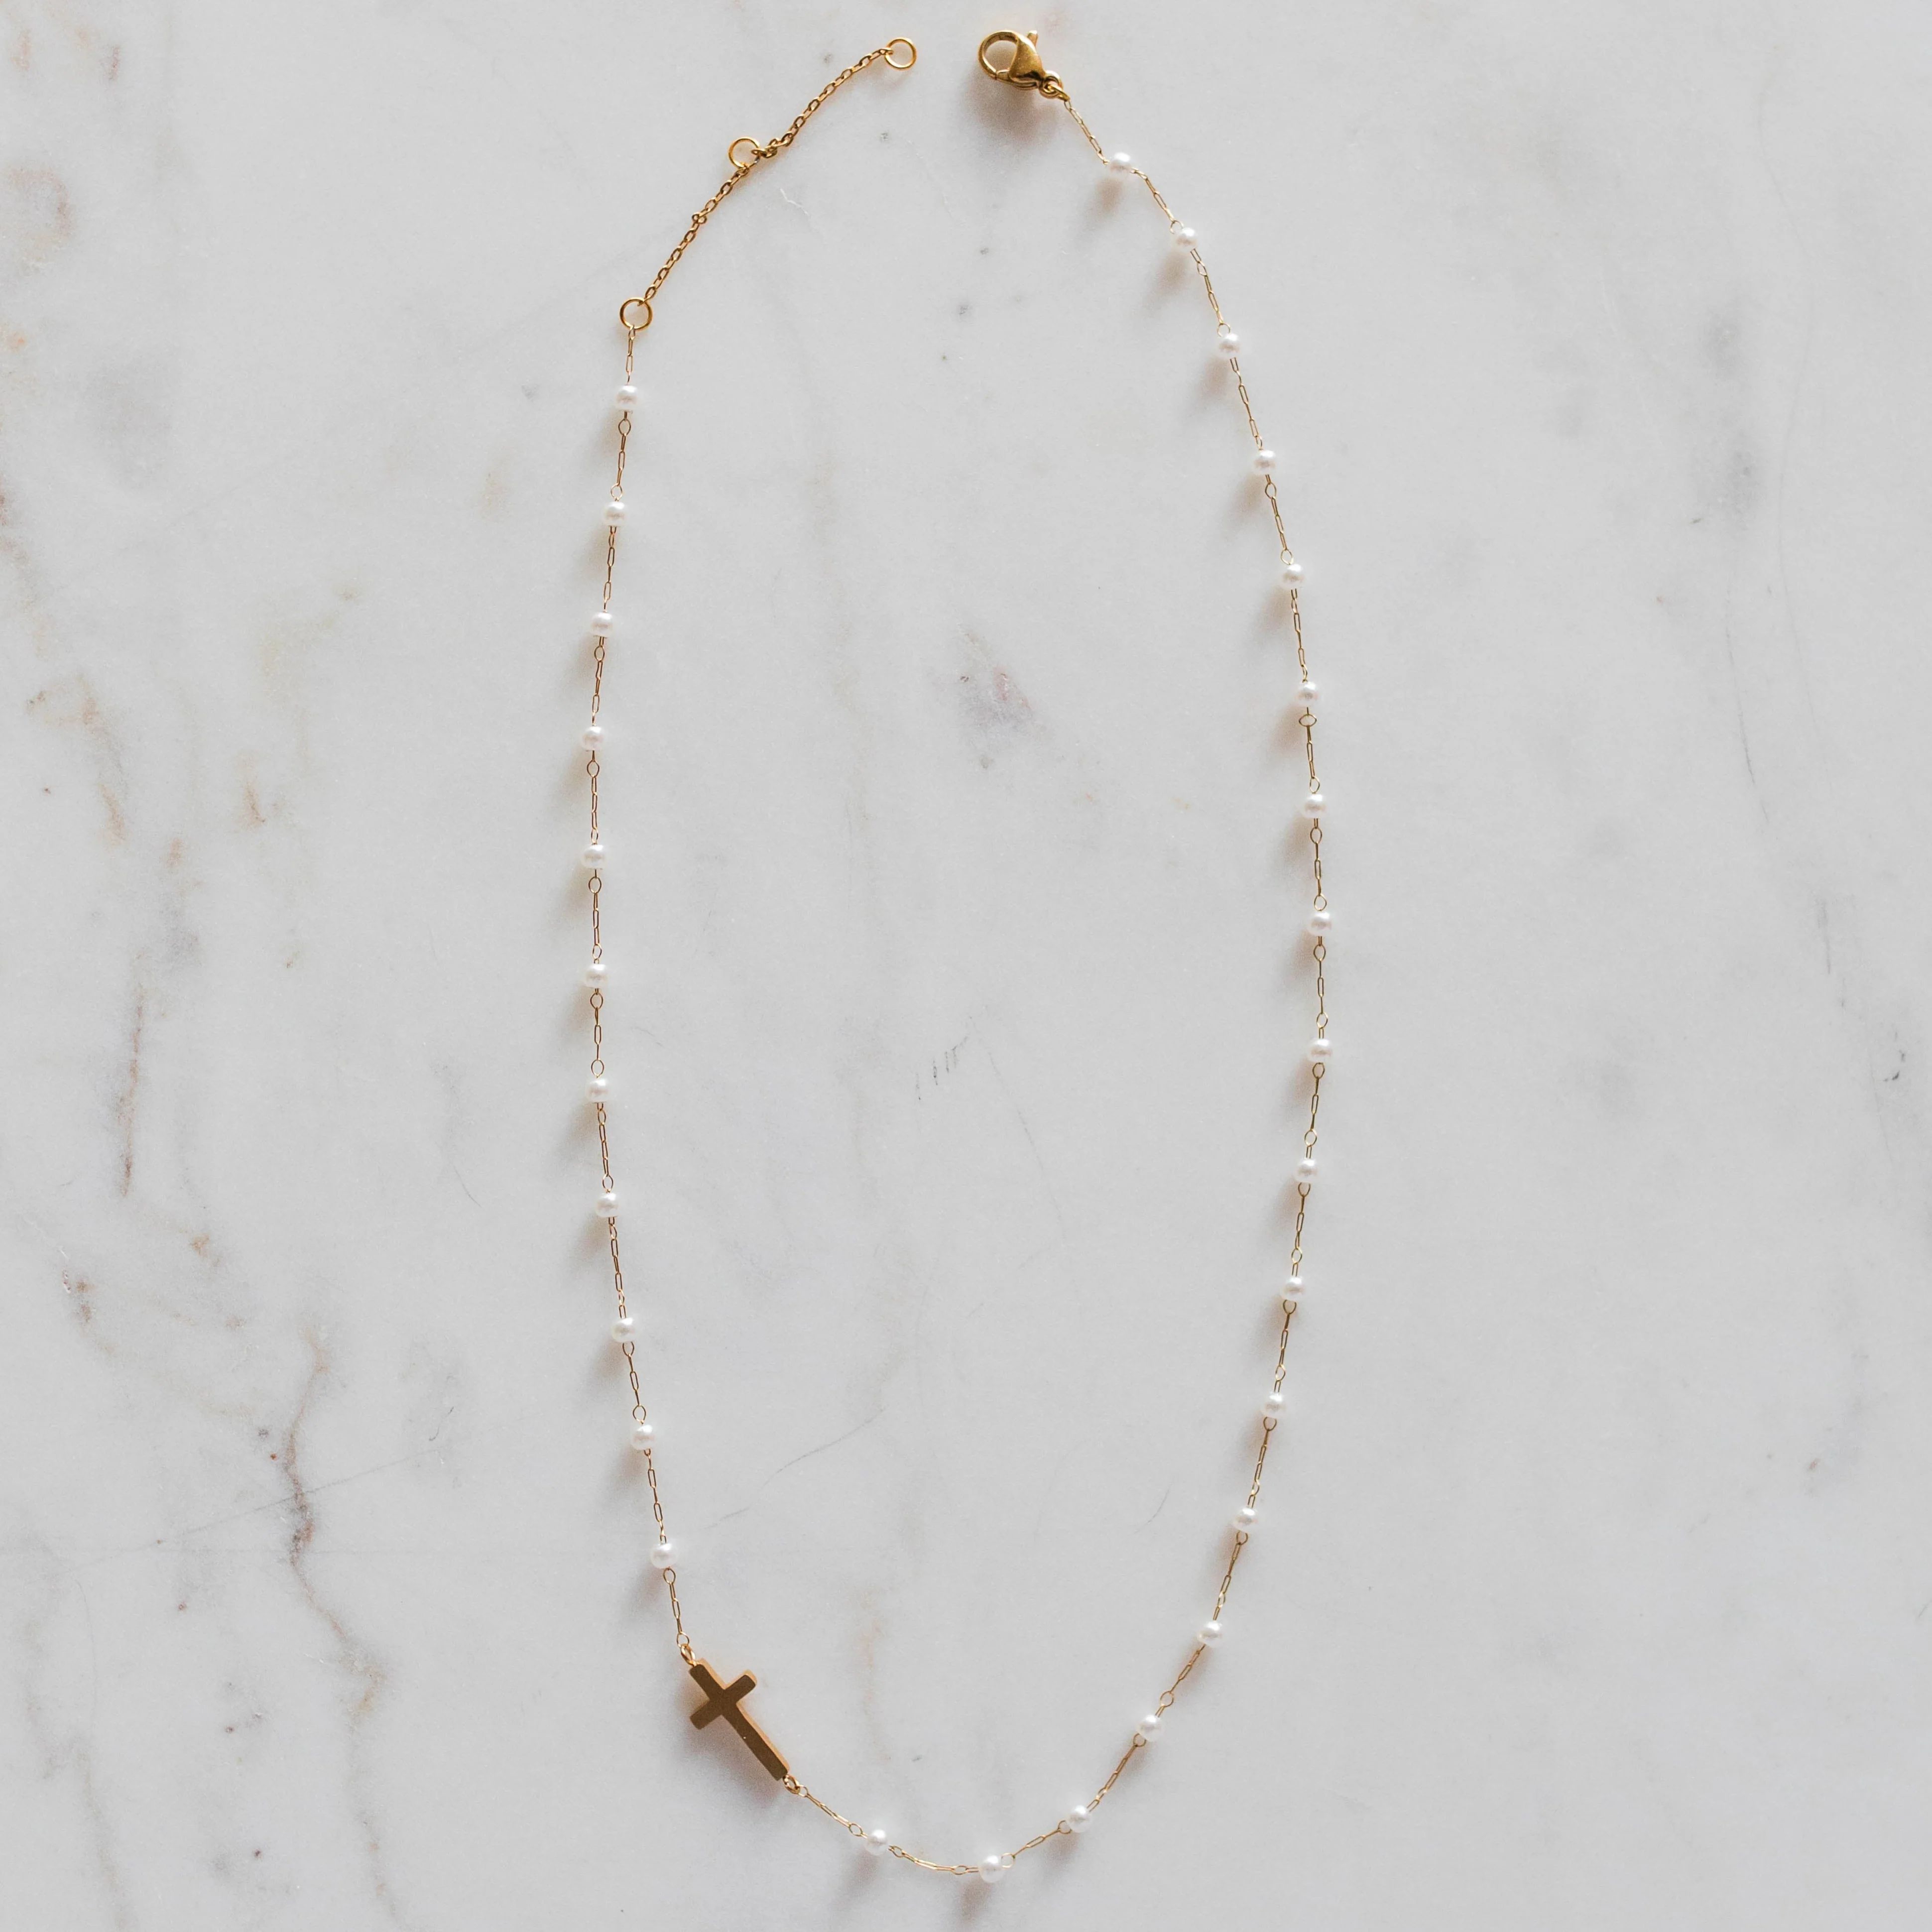 Made New Necklace | TDGC | The Daily Grace Co.